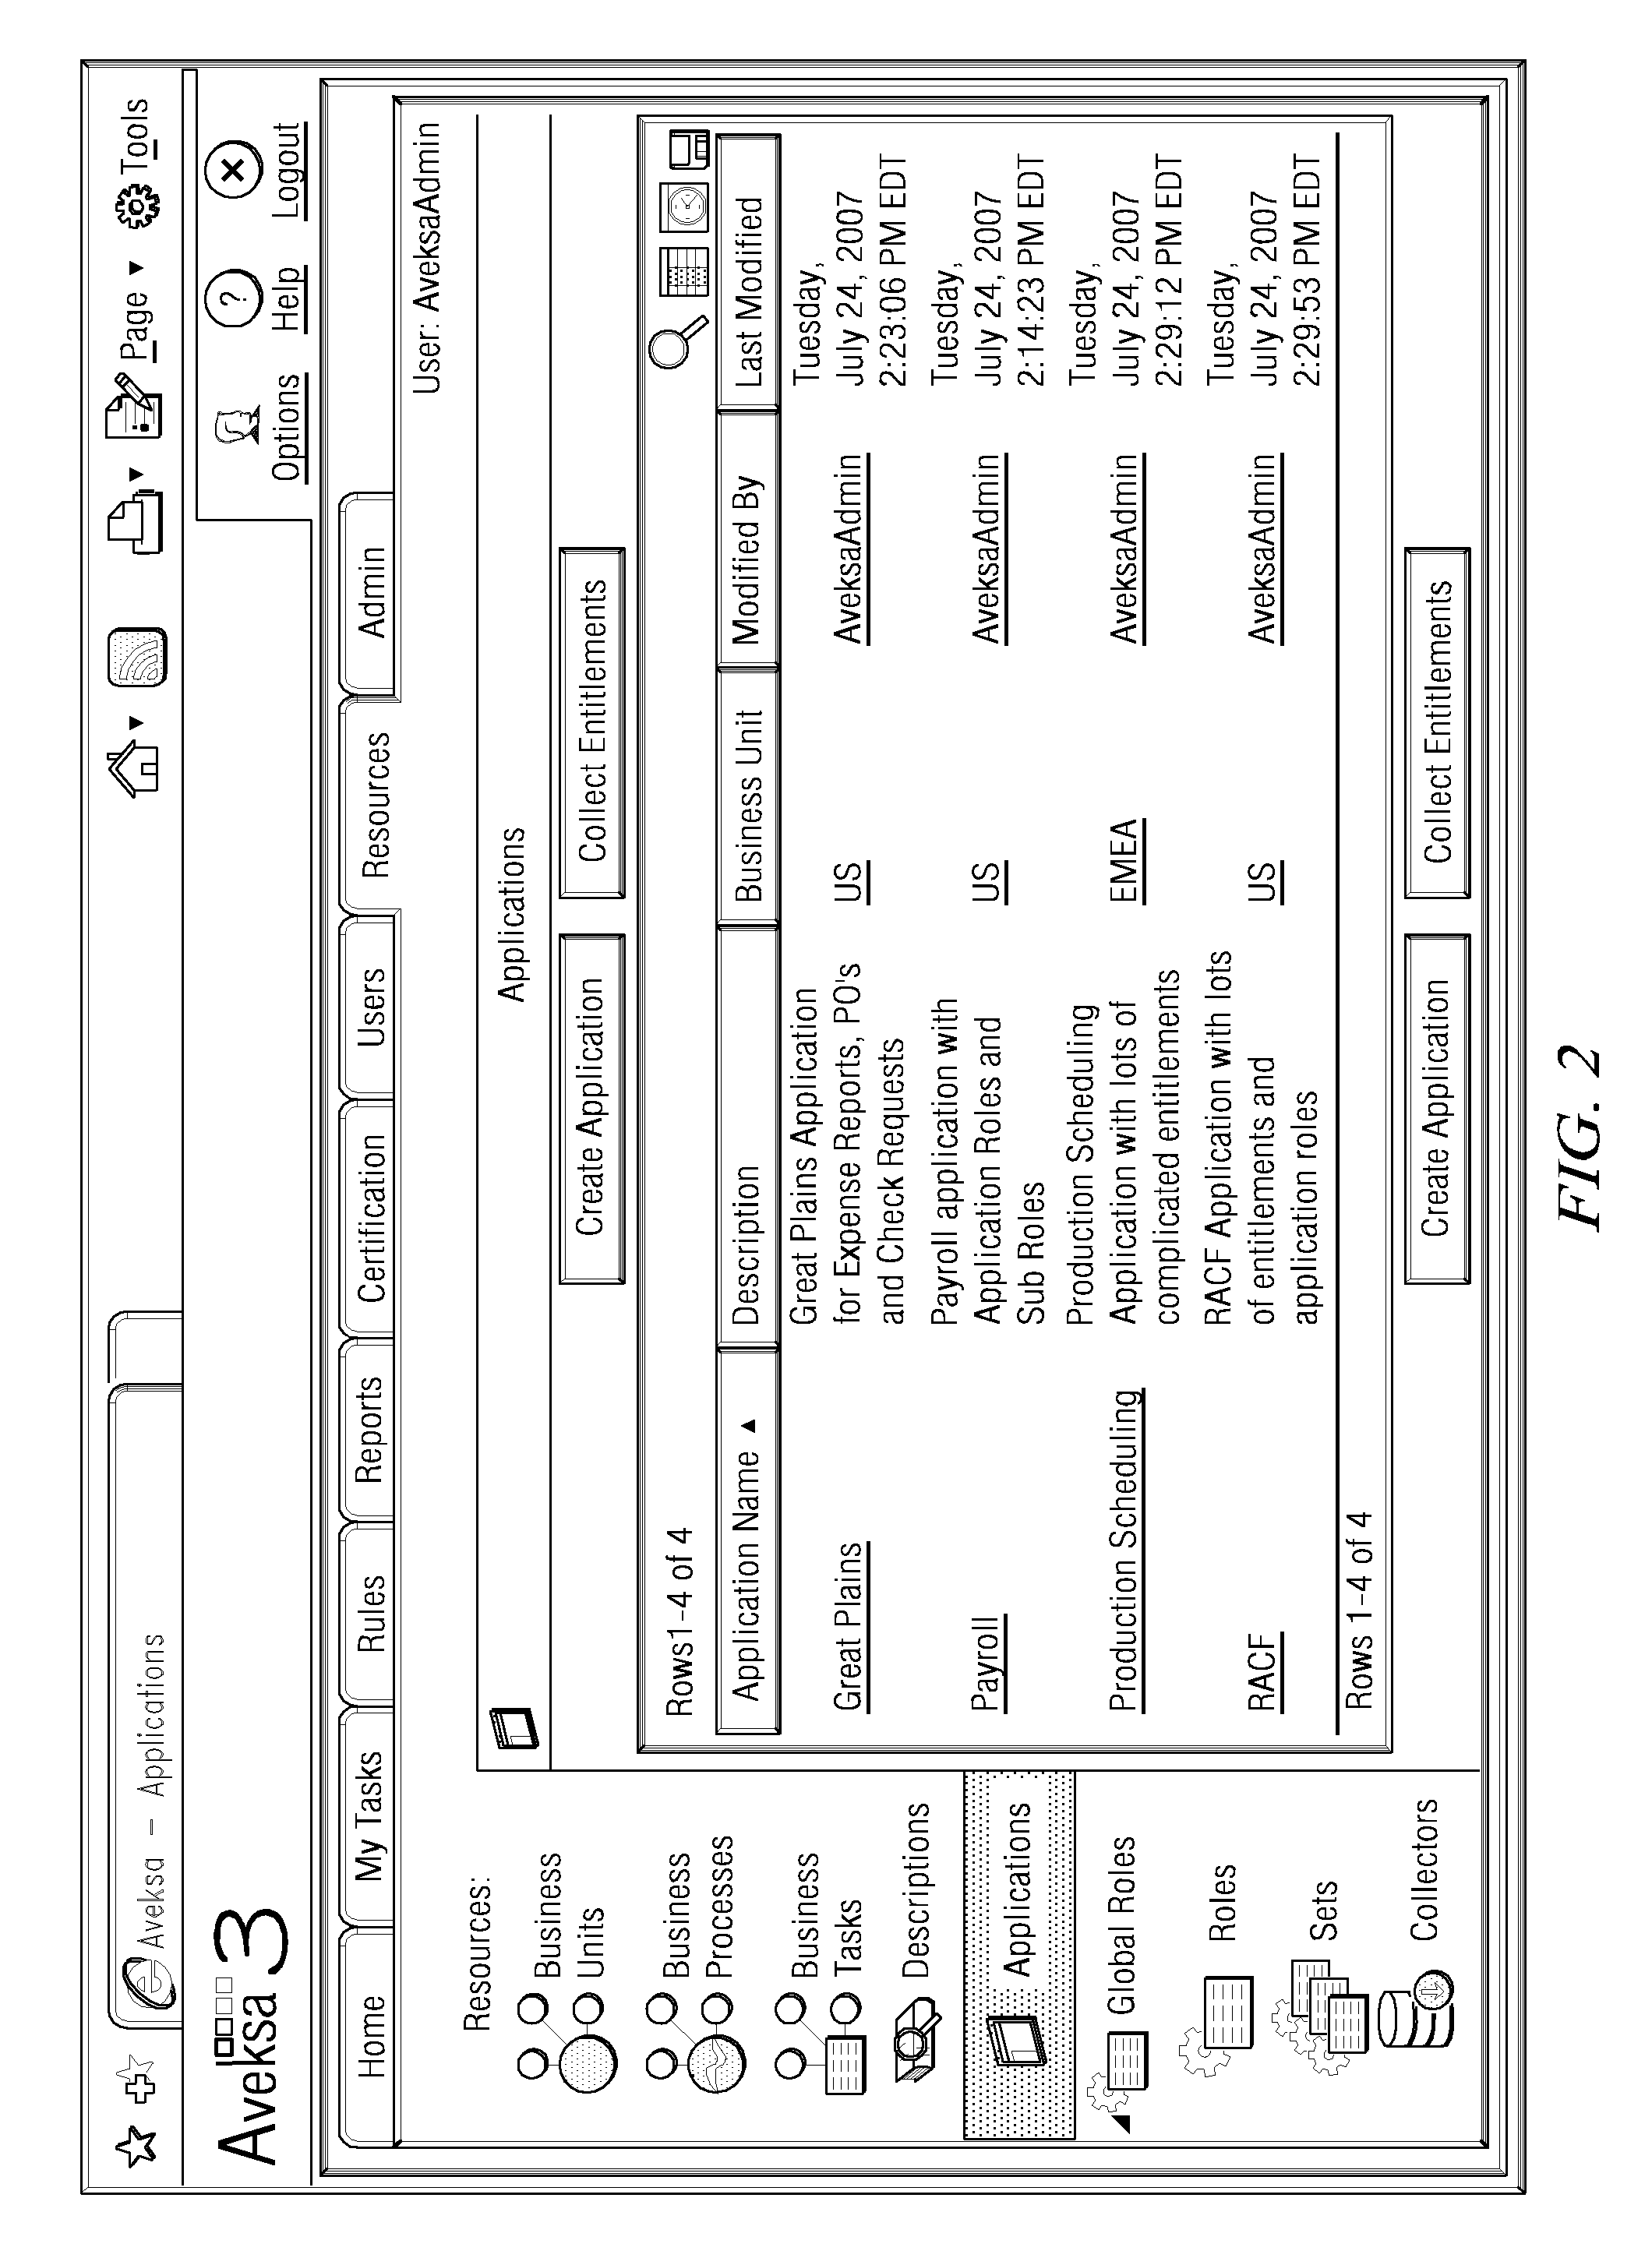 System and method for collecting and normalizing entitlement data within an enterprise